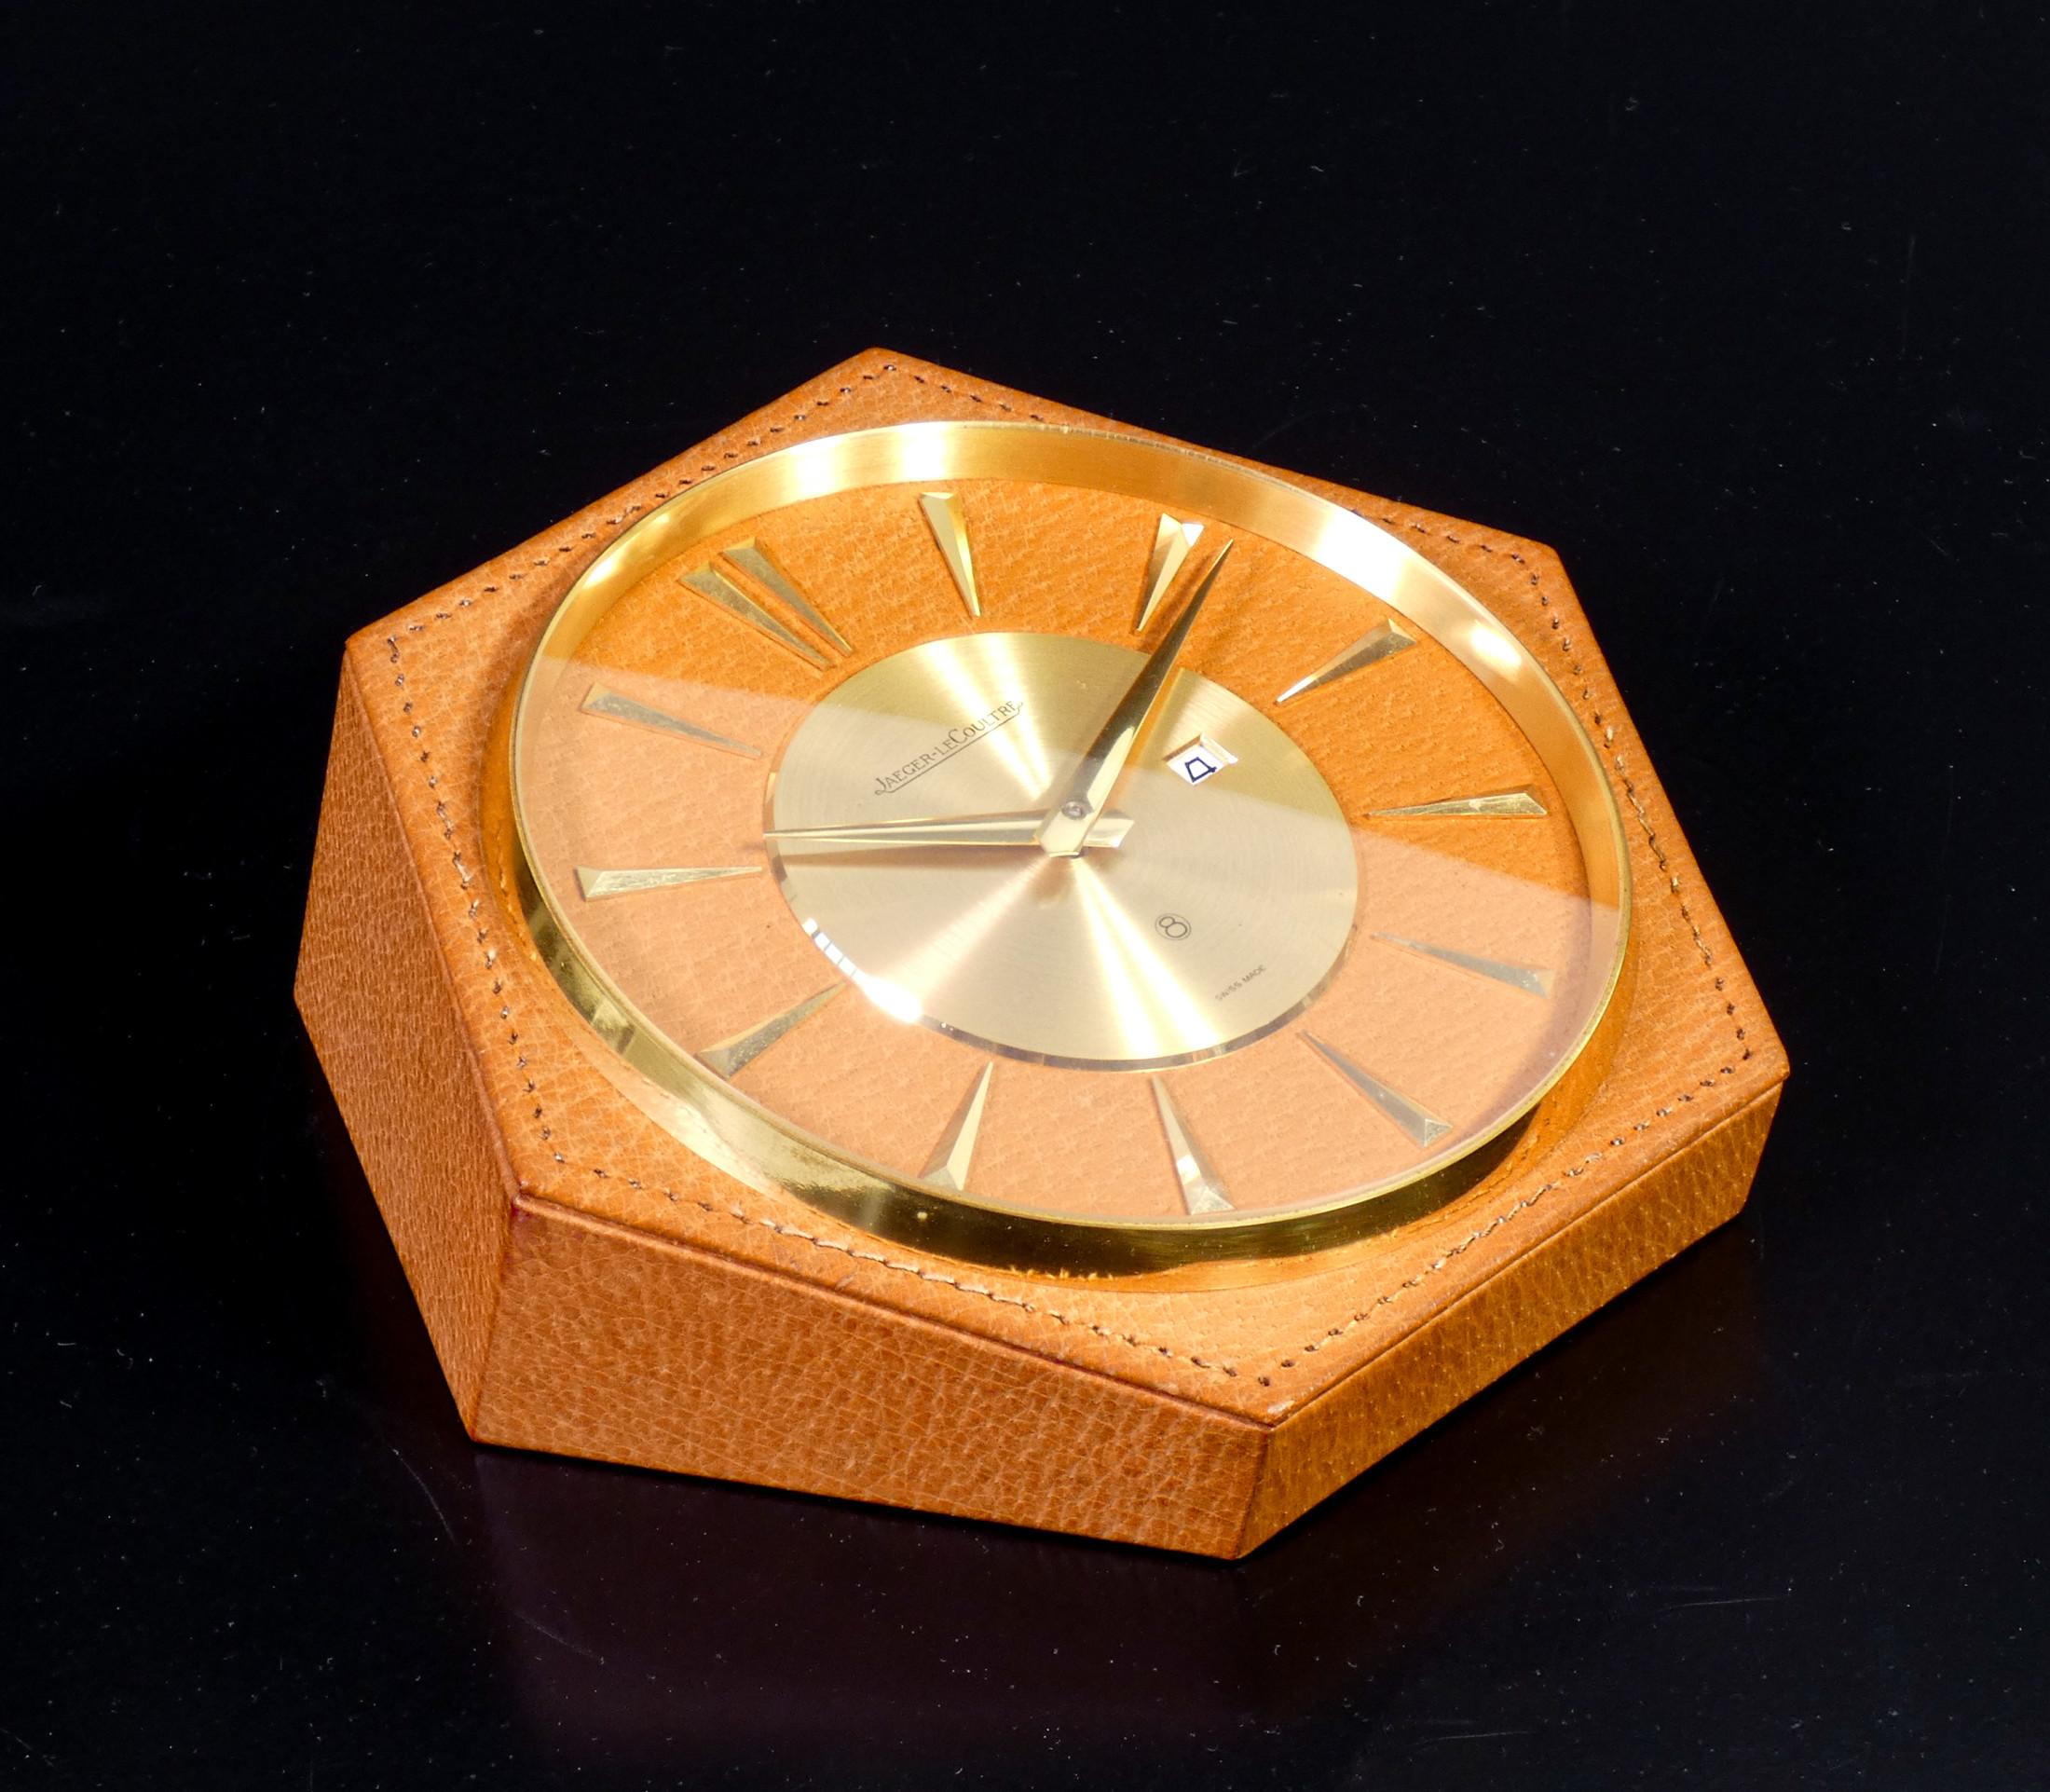 Hand-wound table clock - 8 days.
Jaeger-LeCoultre for Hermes.
Switzerland, 1960s.